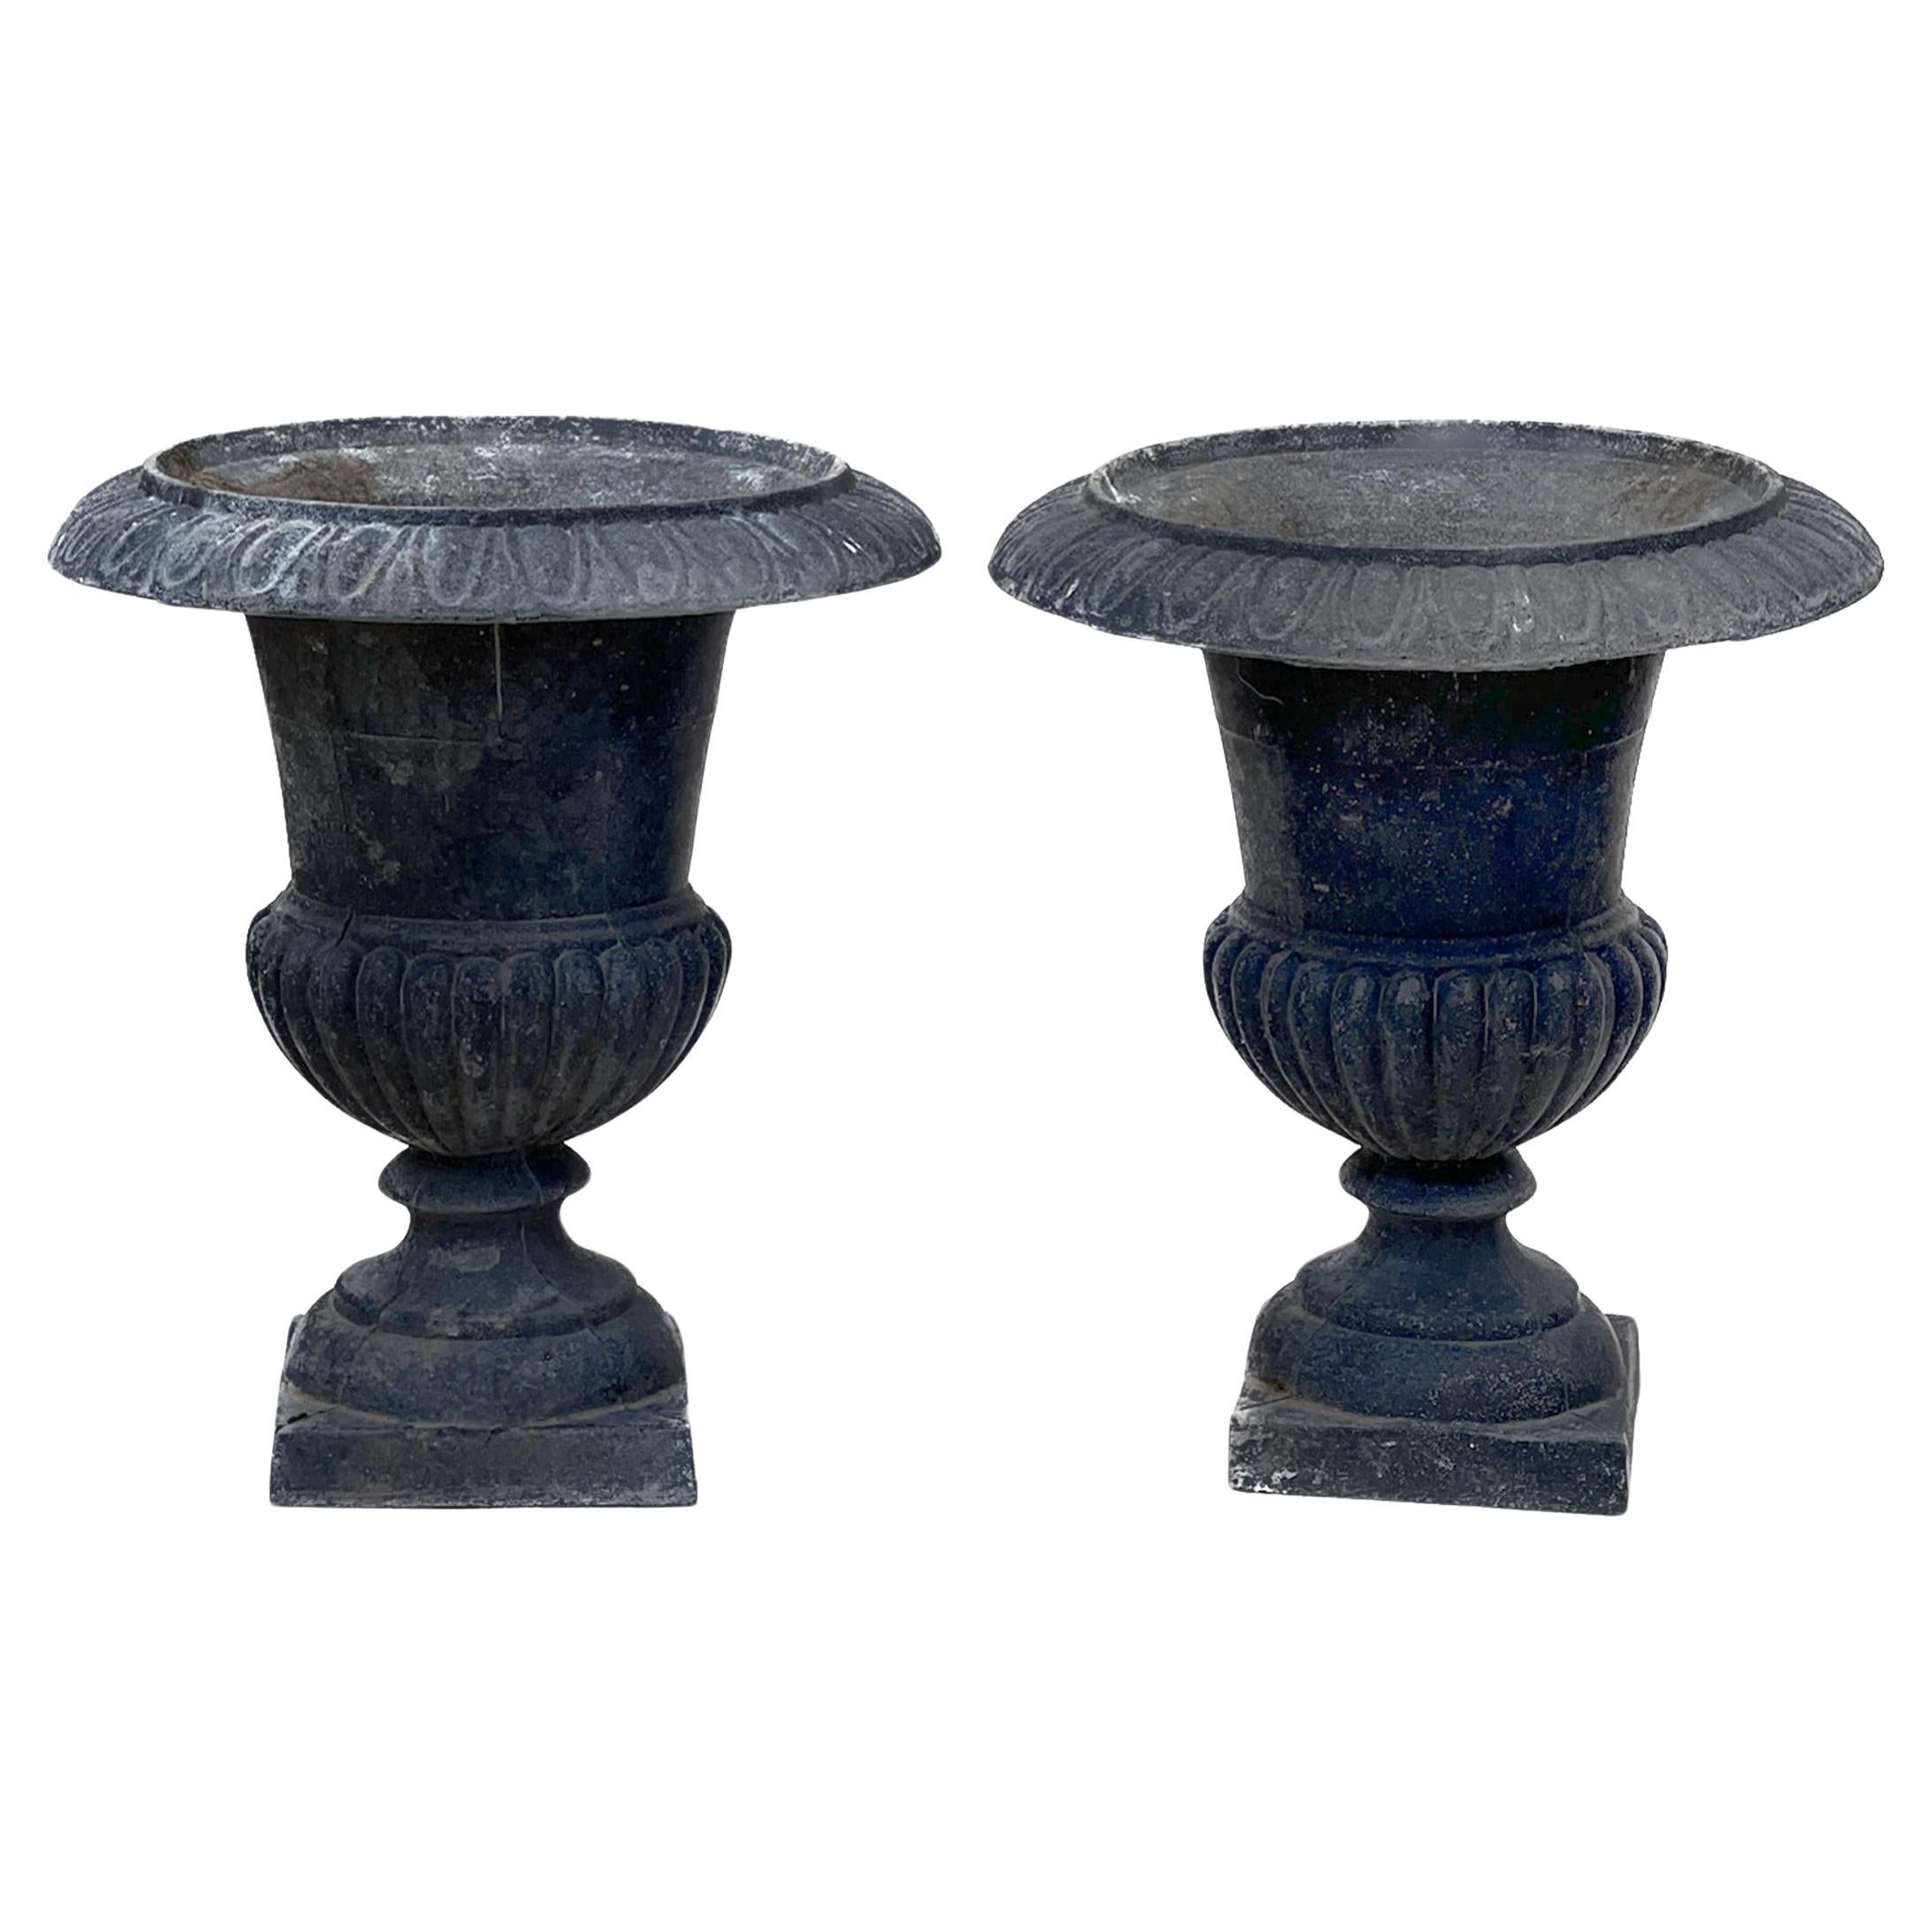 Antique Neoclassical Cast Iron Urn Planters or Jardiniere - Set of 2 For Sale